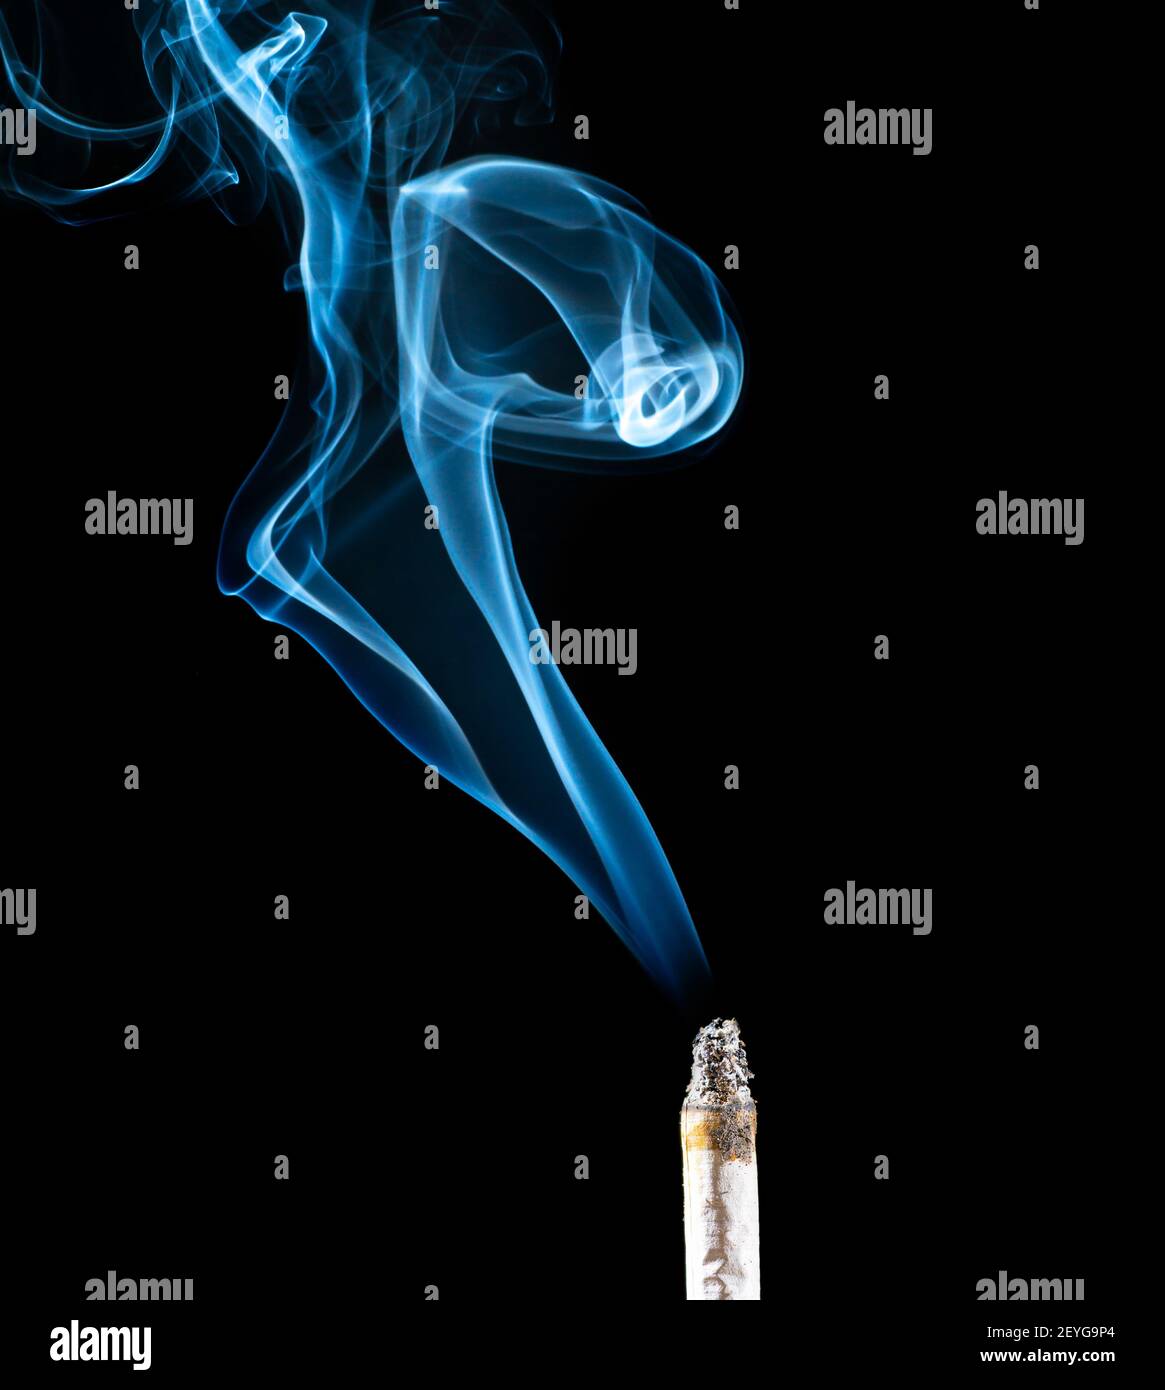 Close-up of backlit smoke cloud coming from a cigarette against black background. Stock Photo